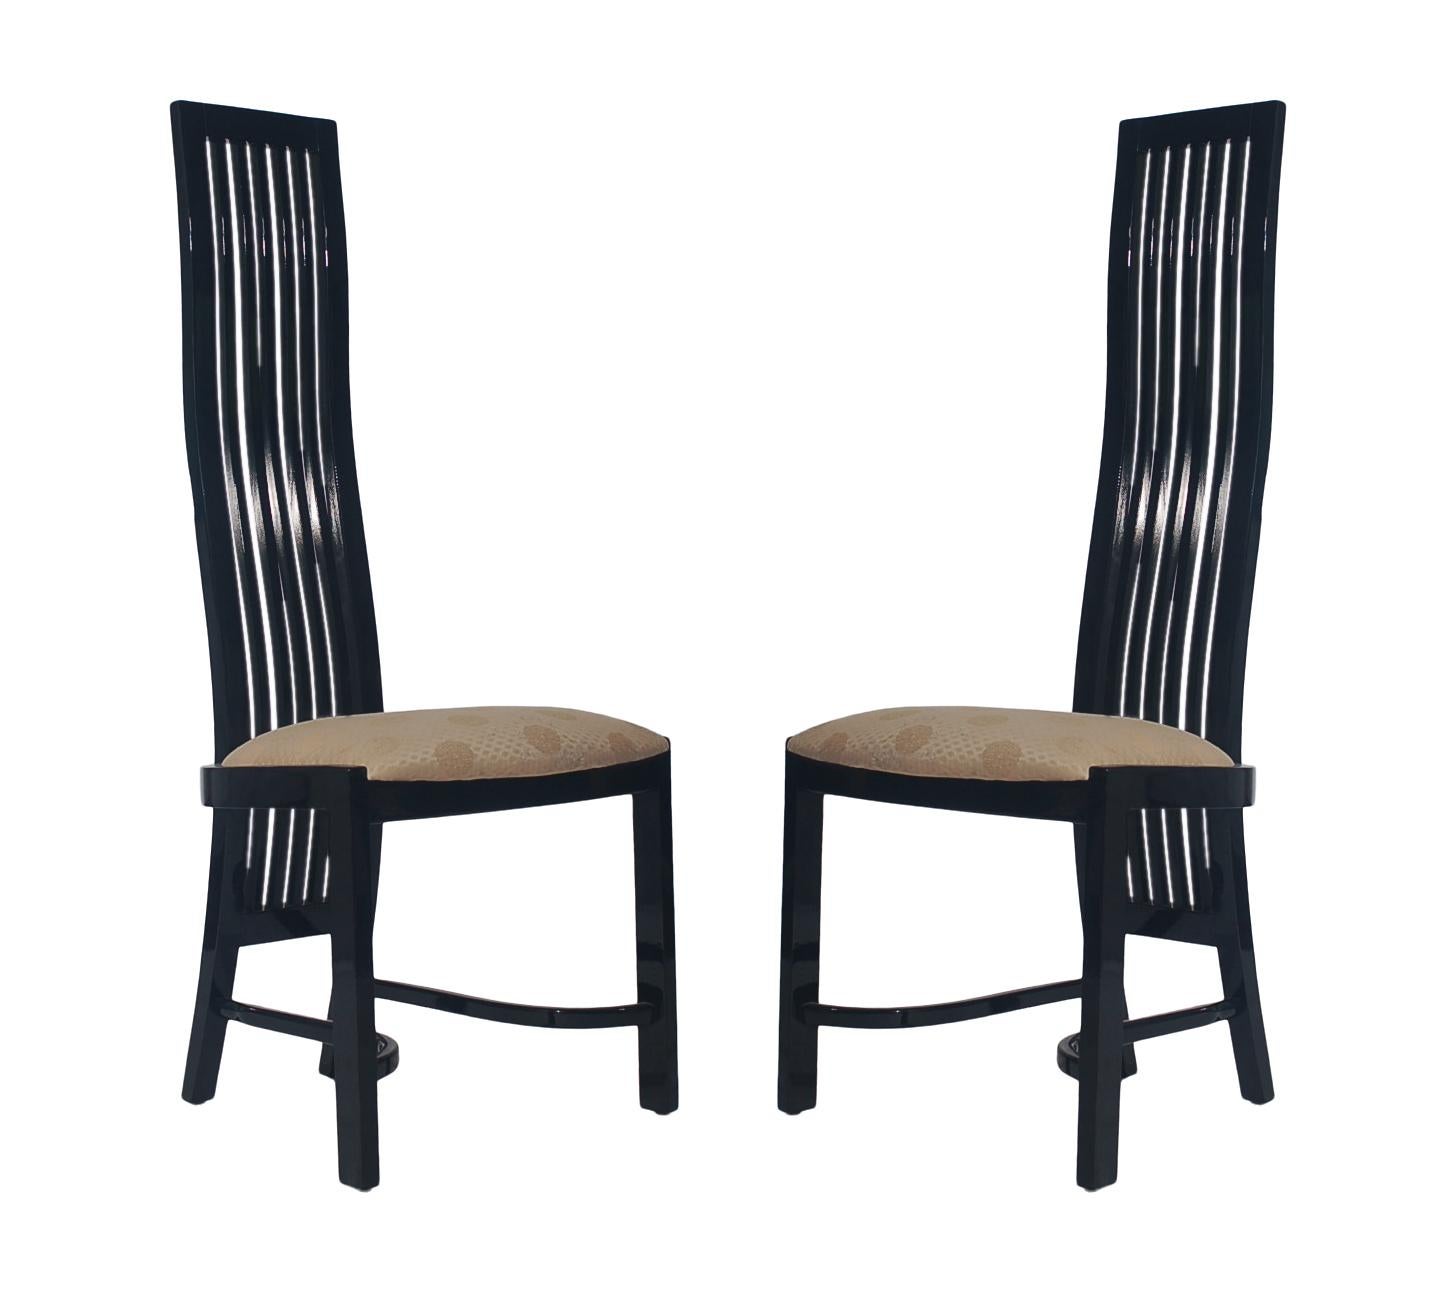 Spanish Set of Eight Postmodern High Back Spindle Dining Chairs from Spain in Black